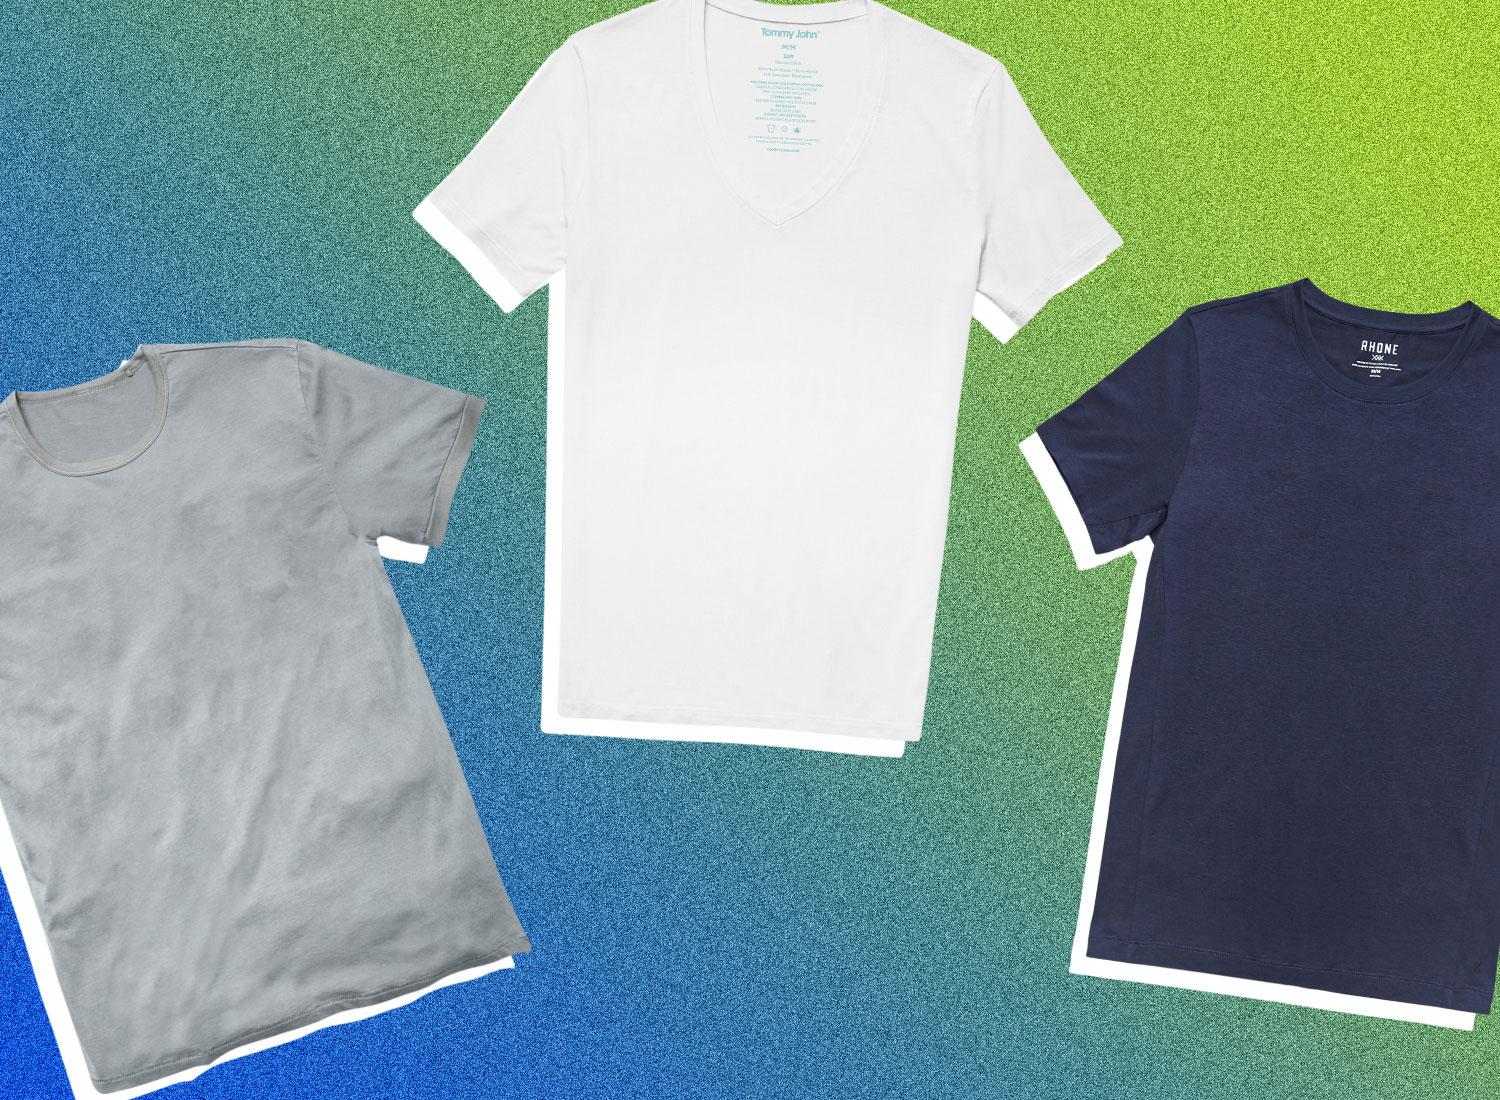 20 Best Men’s Undershirts For Easy Layering